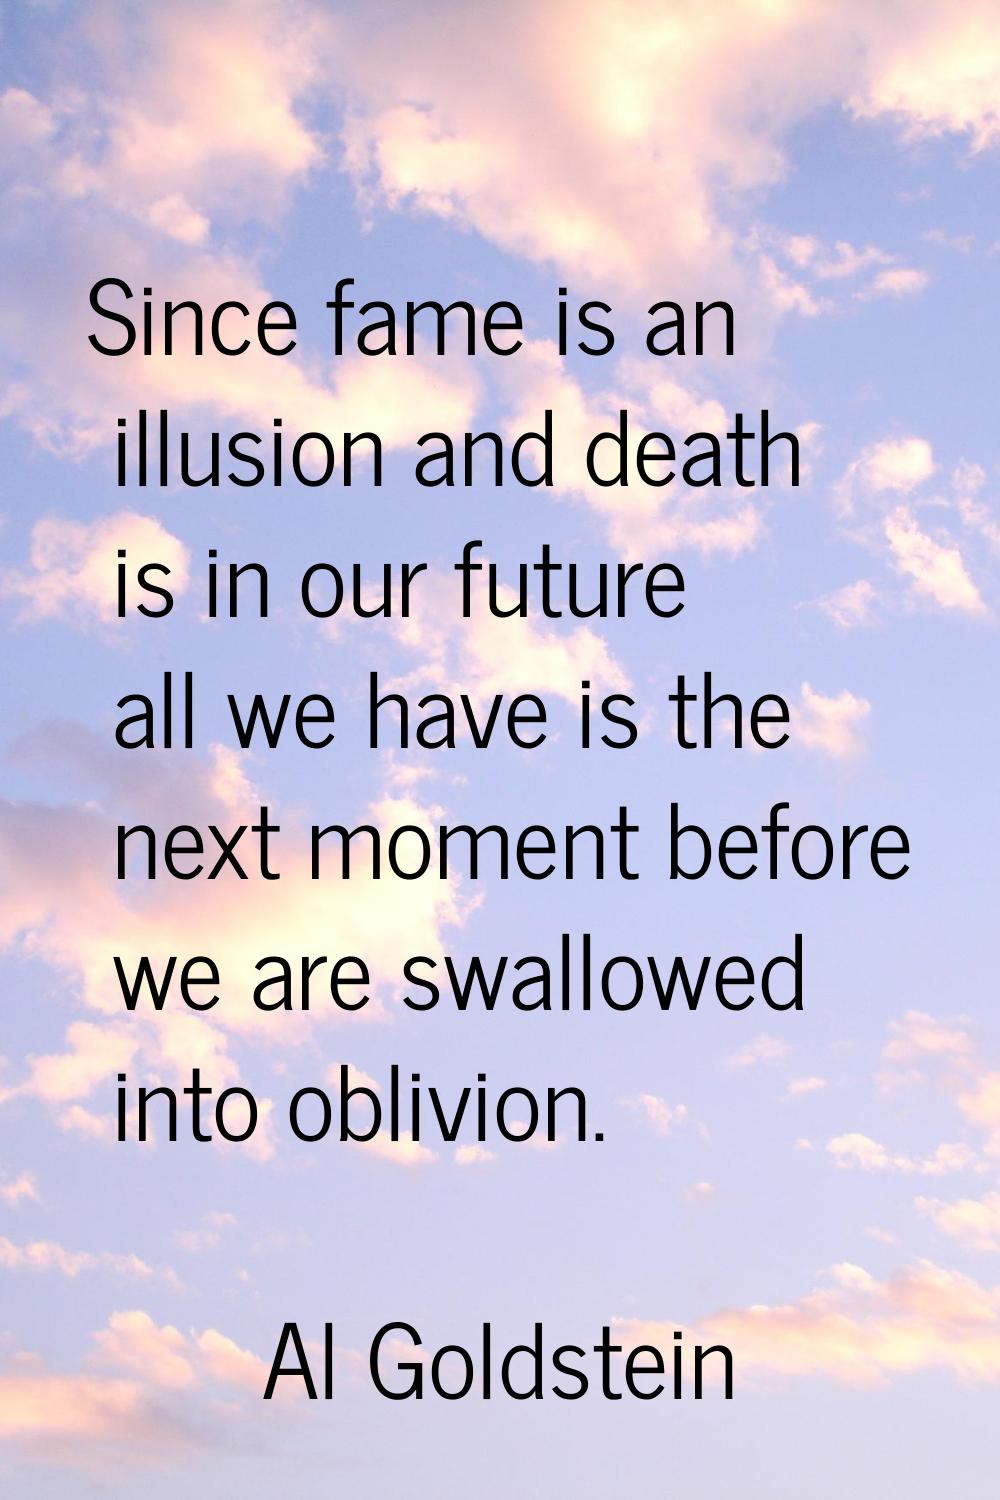 Since fame is an illusion and death is in our future all we have is the next moment before we are s